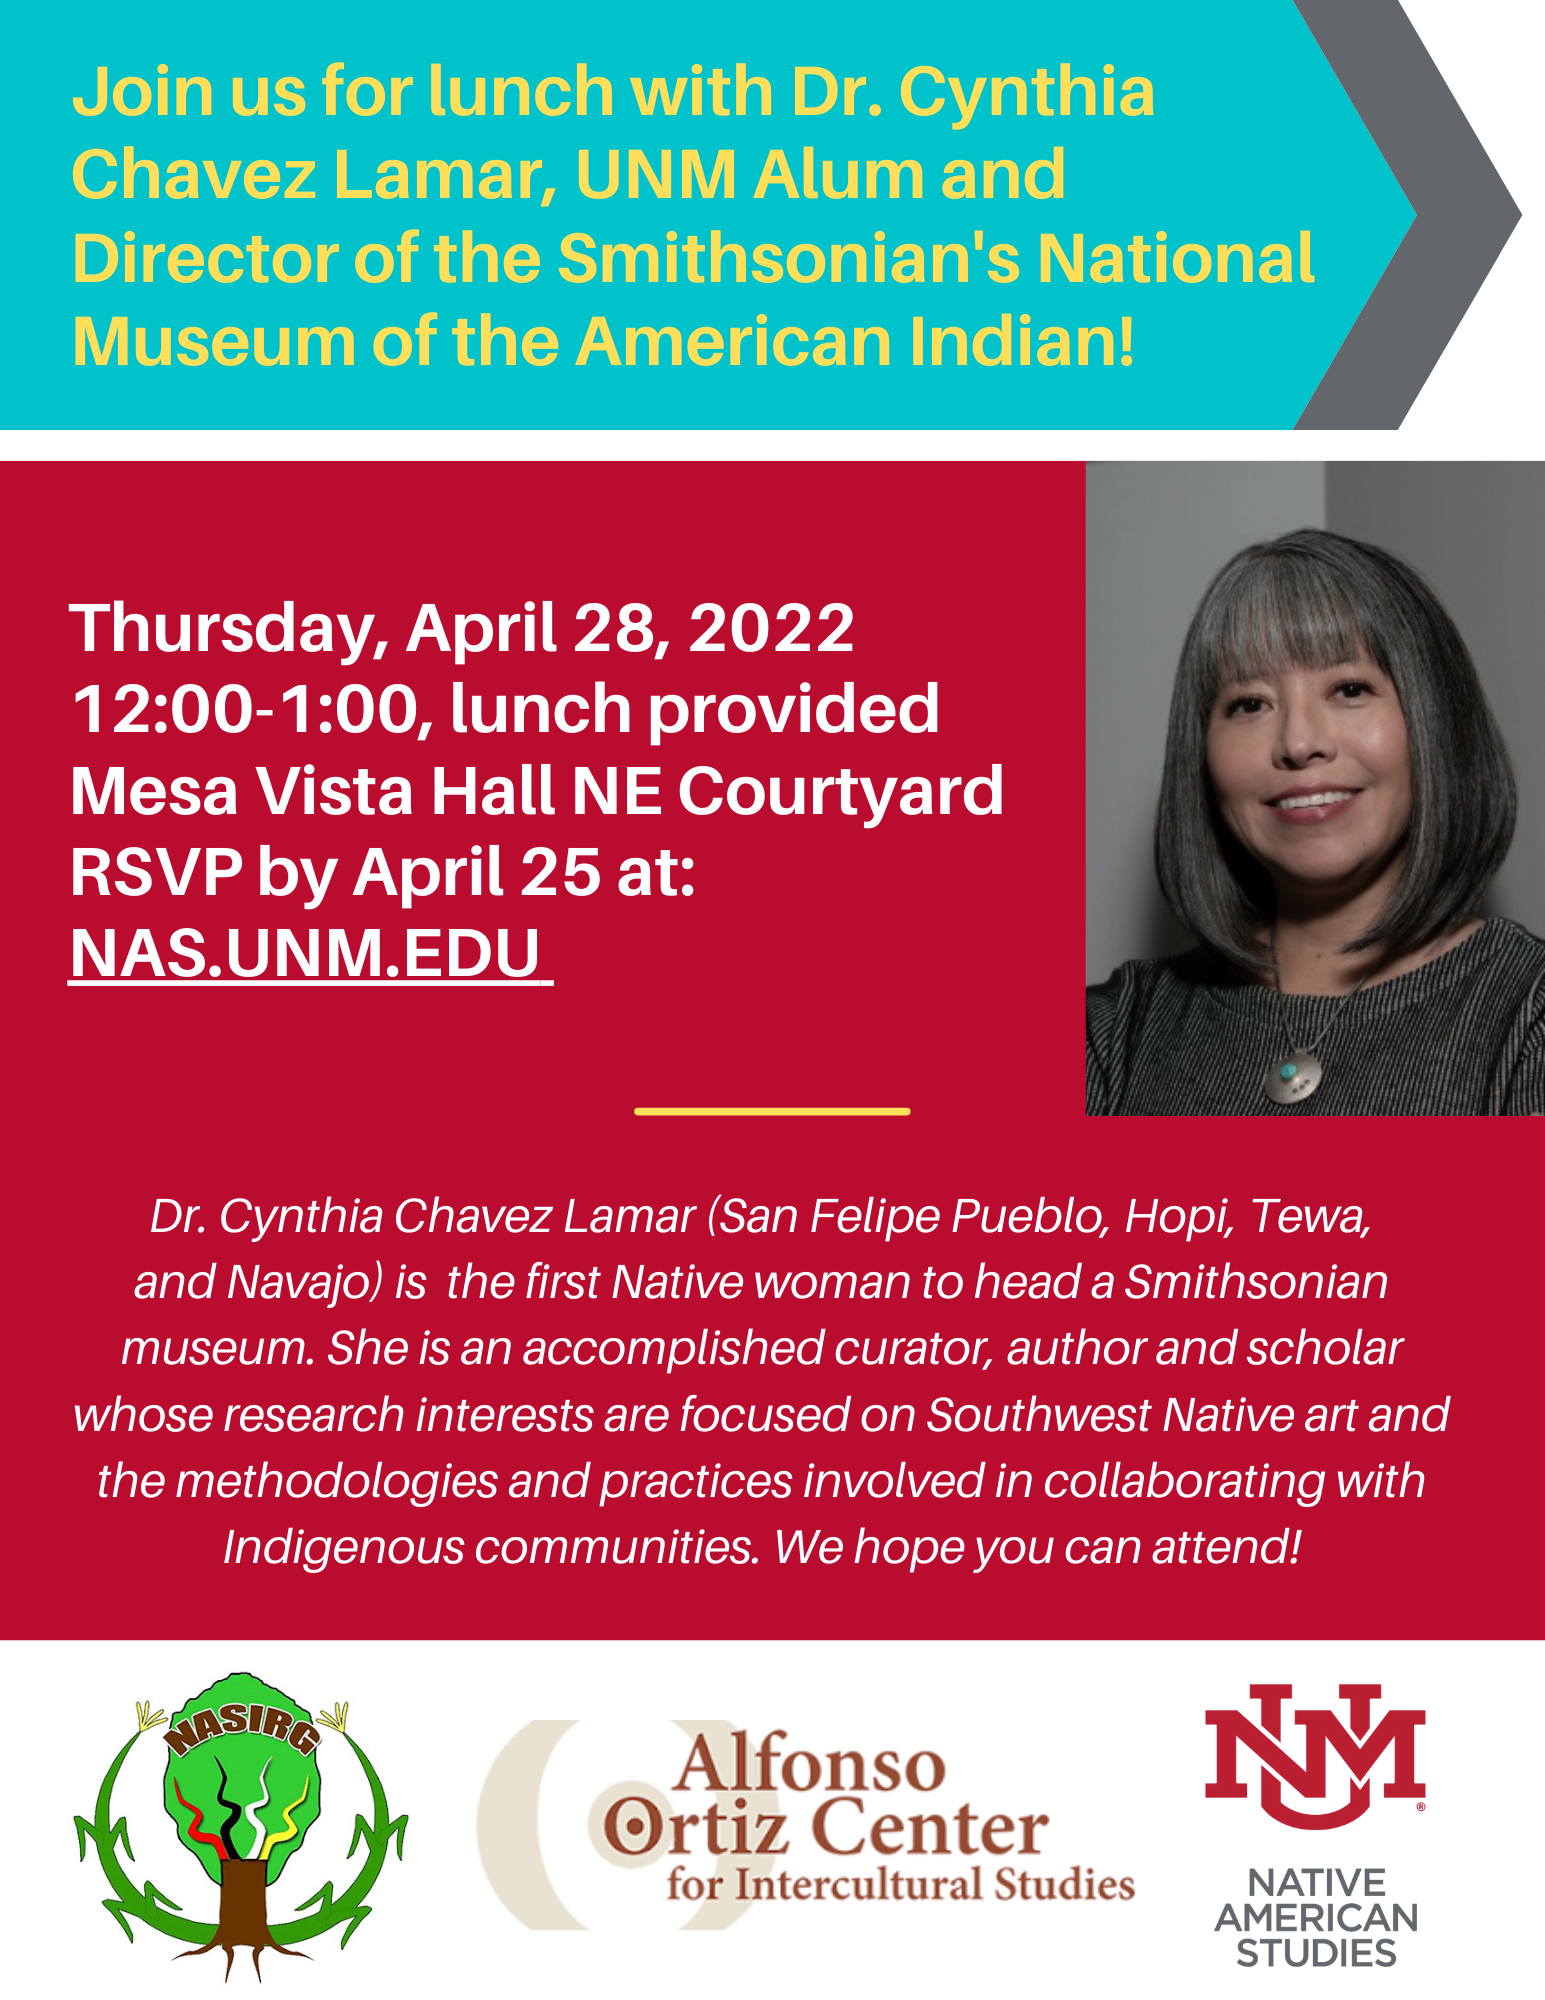 Student Lunch with Dr. Chavez Lamar